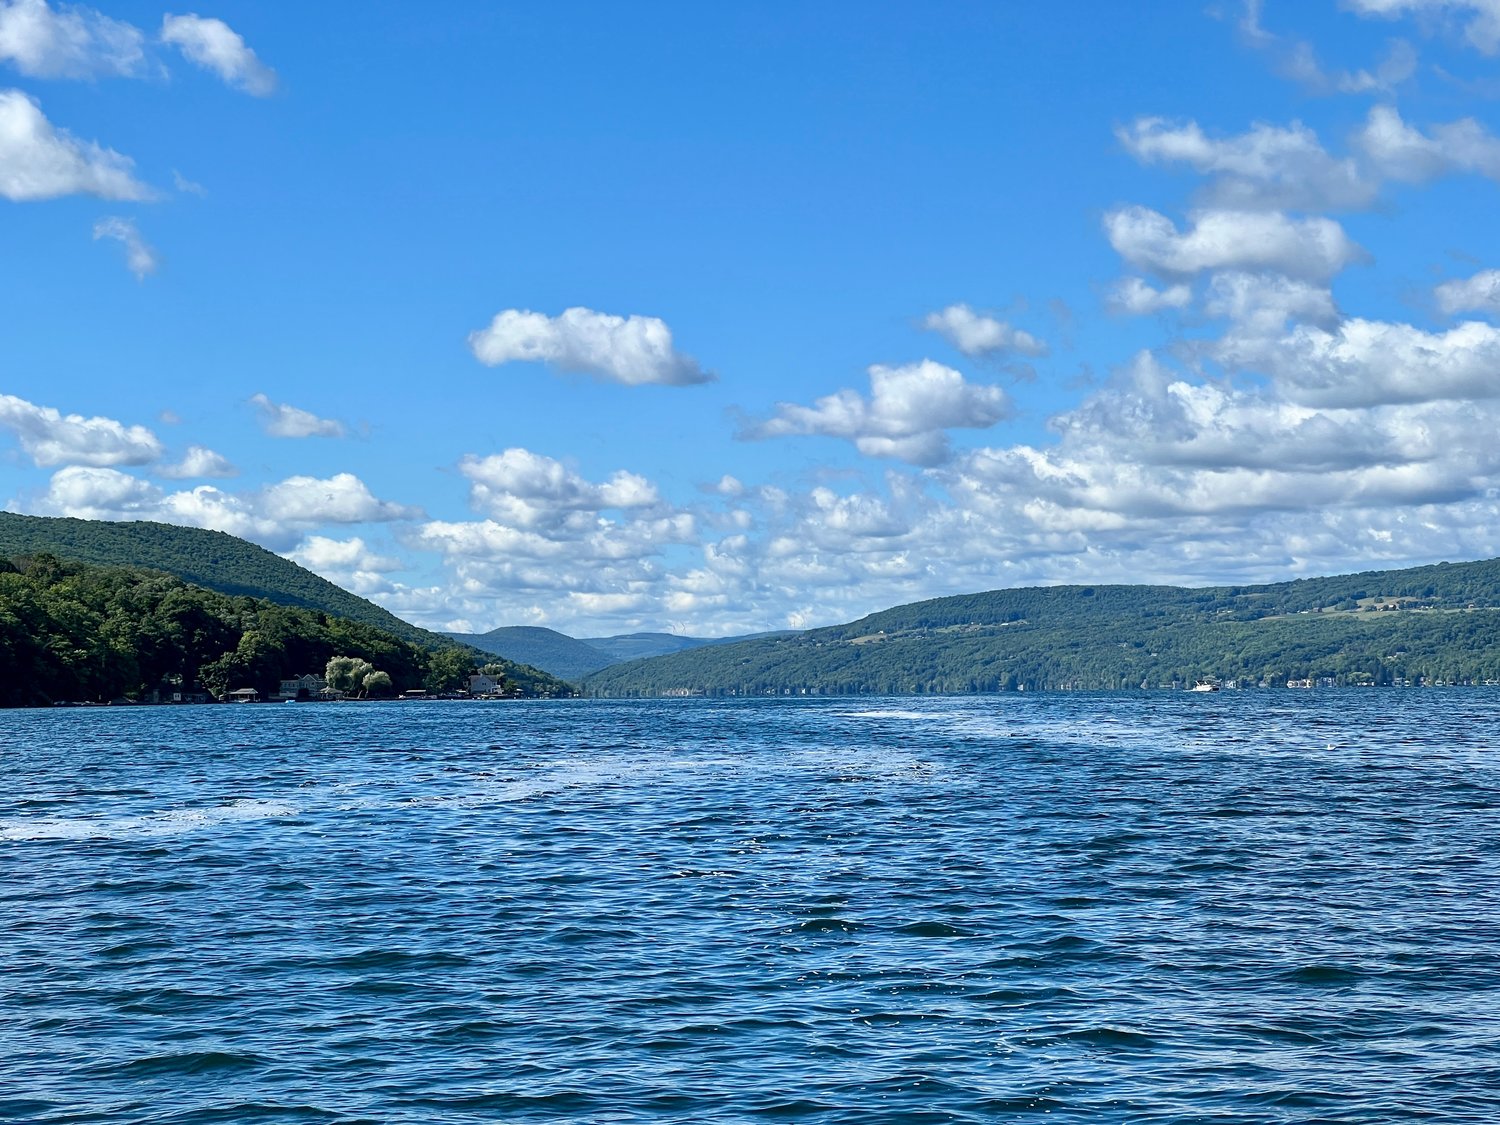 Canandaigua Lake, a perfect place to get away for a swim or to walk around. Over the weekend, my exercise routine consisted of swimming and morning walks with friends.